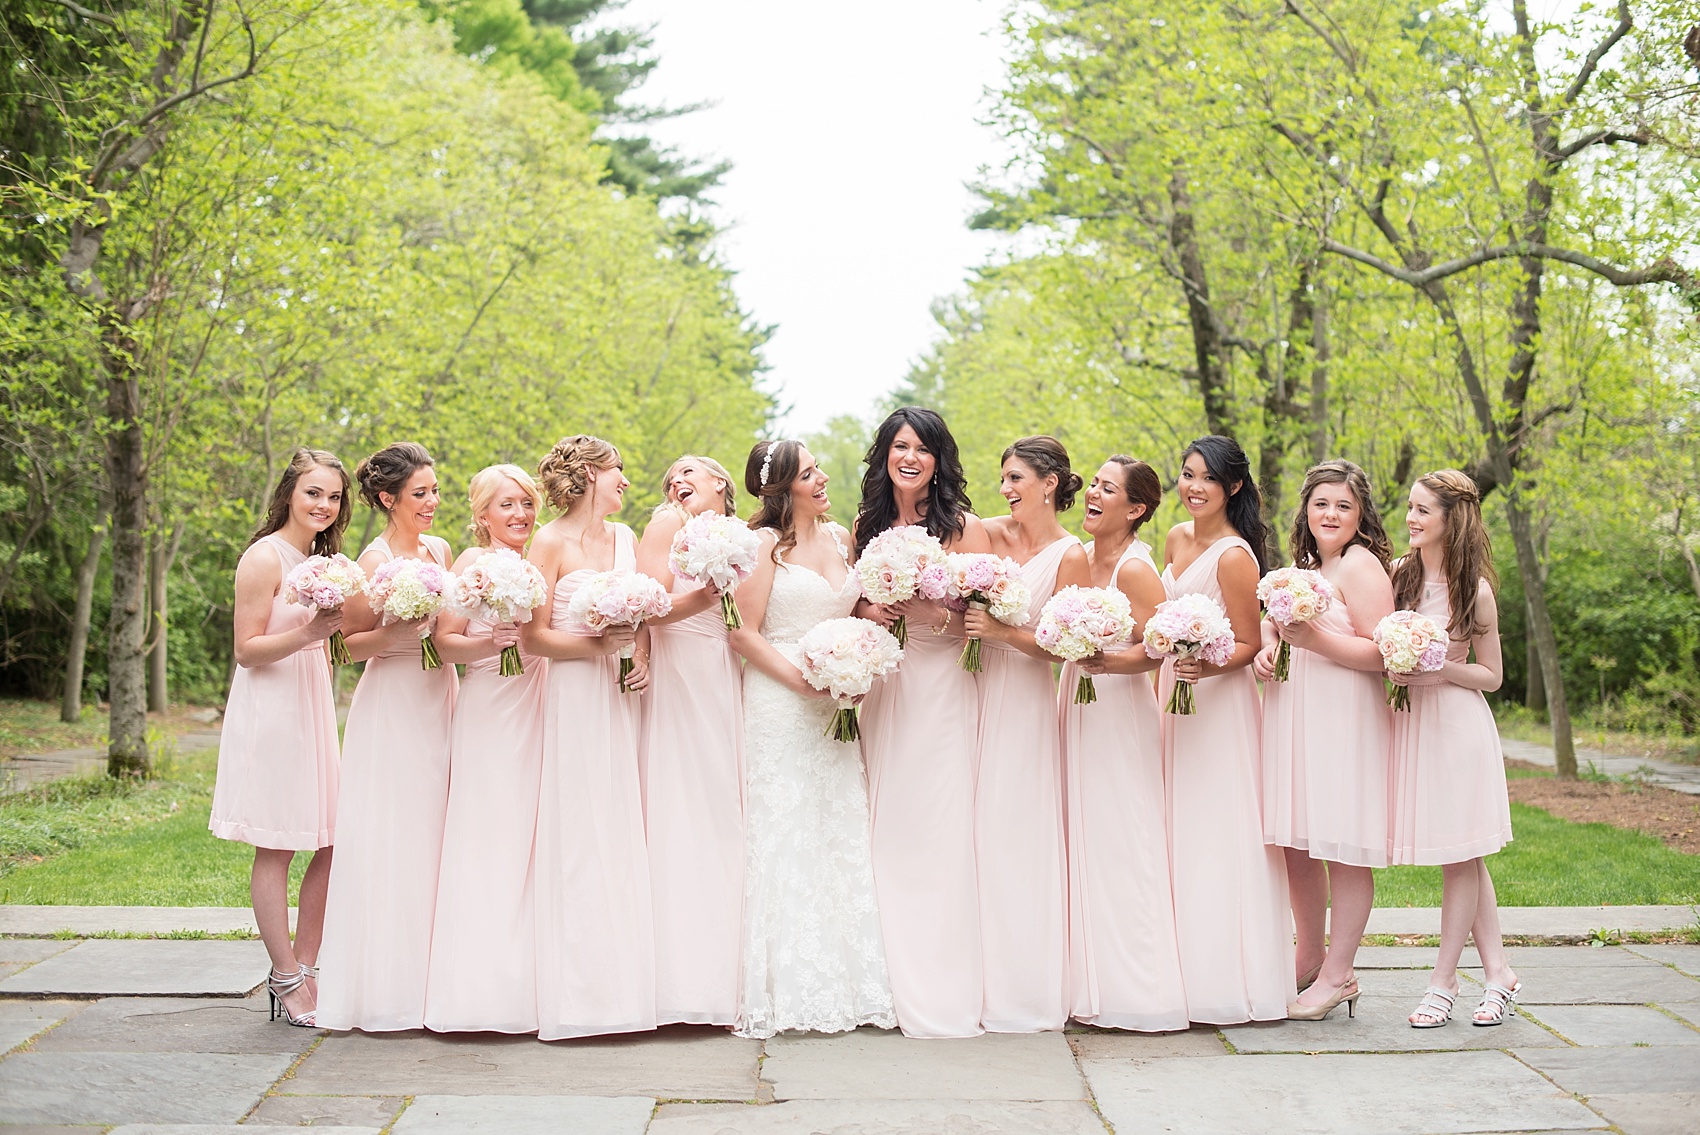 Wedding party with bridesmaids in blush pink. Photos at a Skylands Manor wedding. Images by Mikkel Paige Photography, NJ wedding photographer.